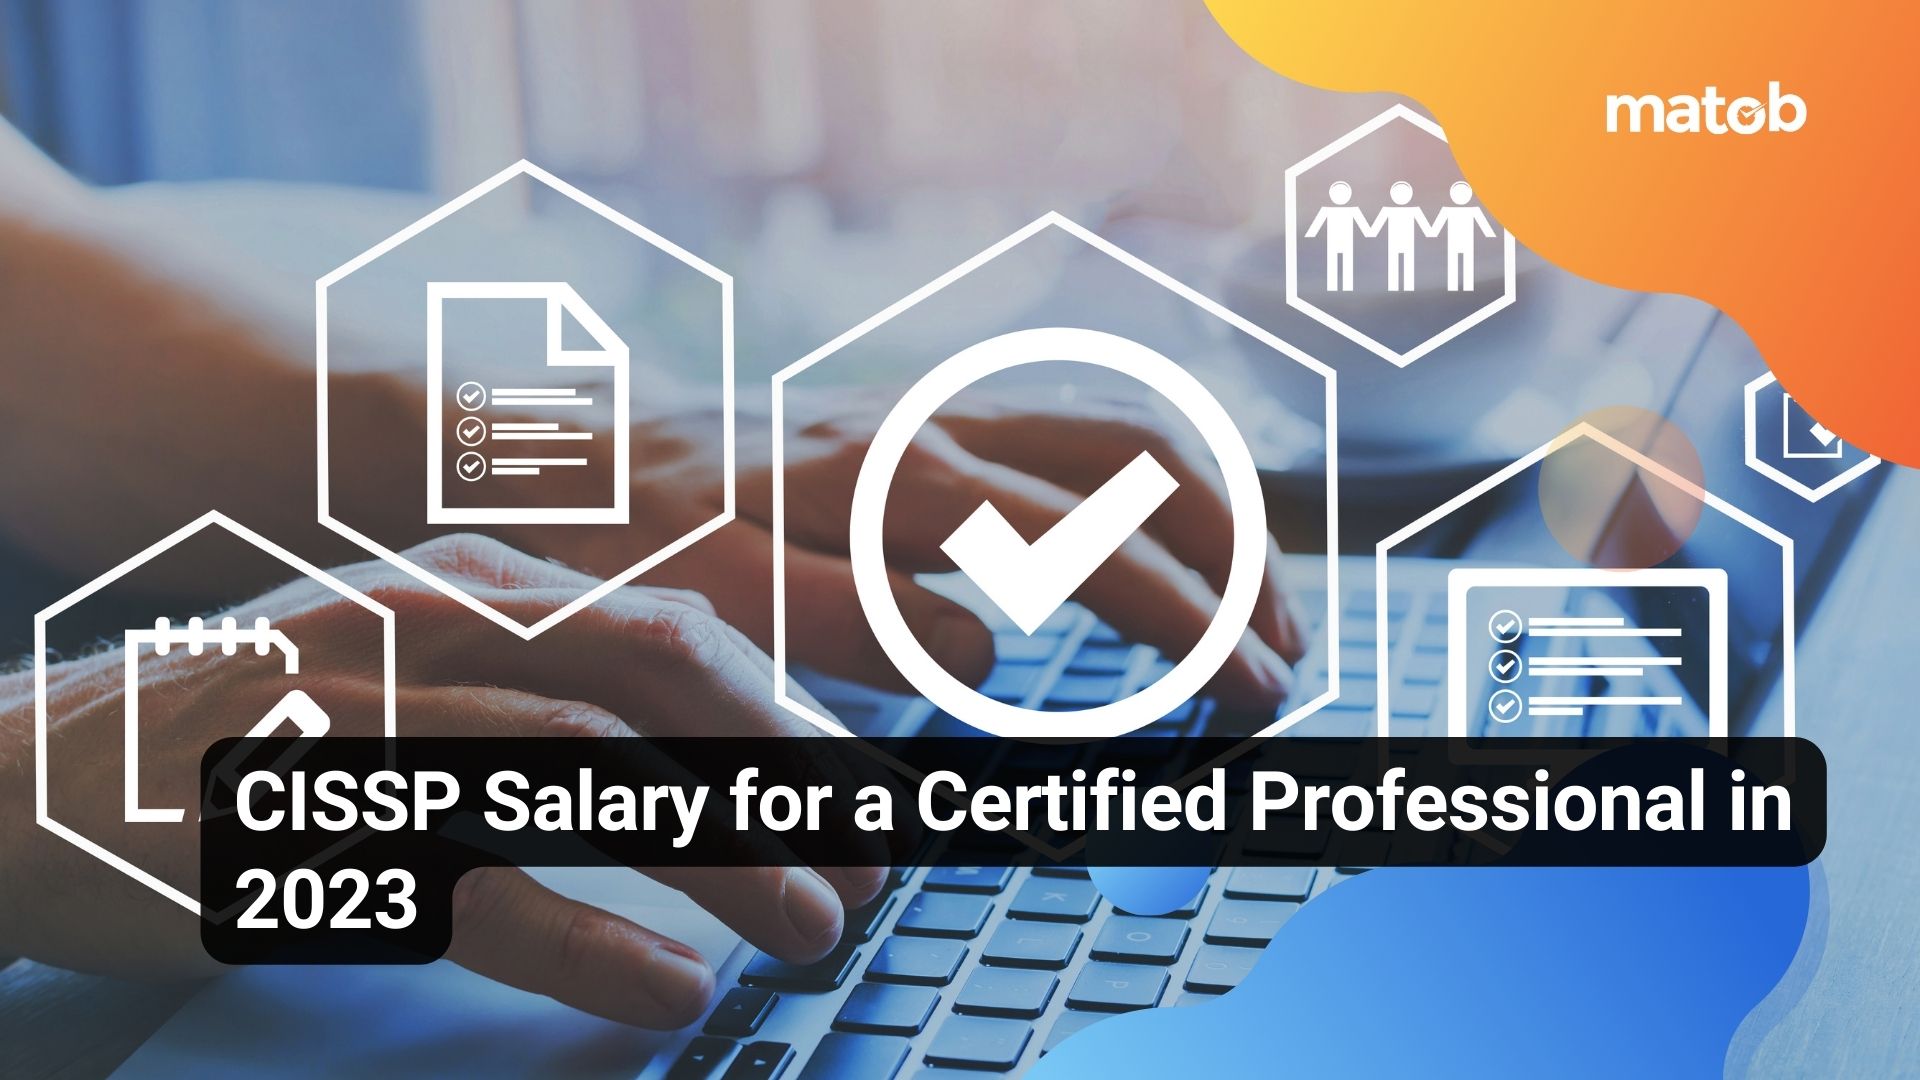 CISSP Salary for a Certified Professional in 2023